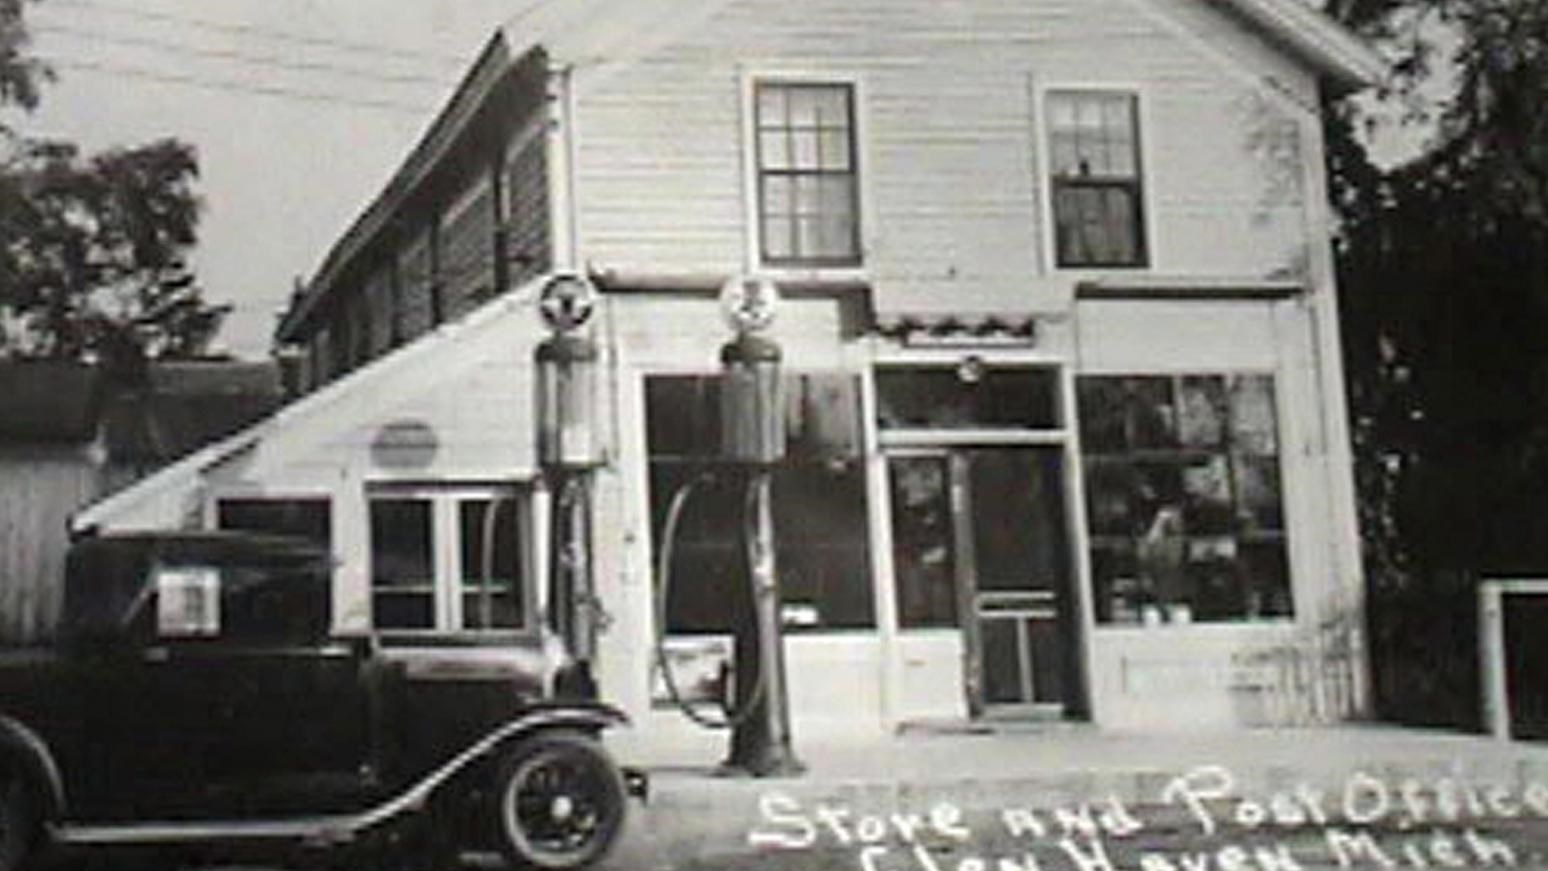 Historic photo of clapboarded building with two gas pumps and an early-1900s car parked in front